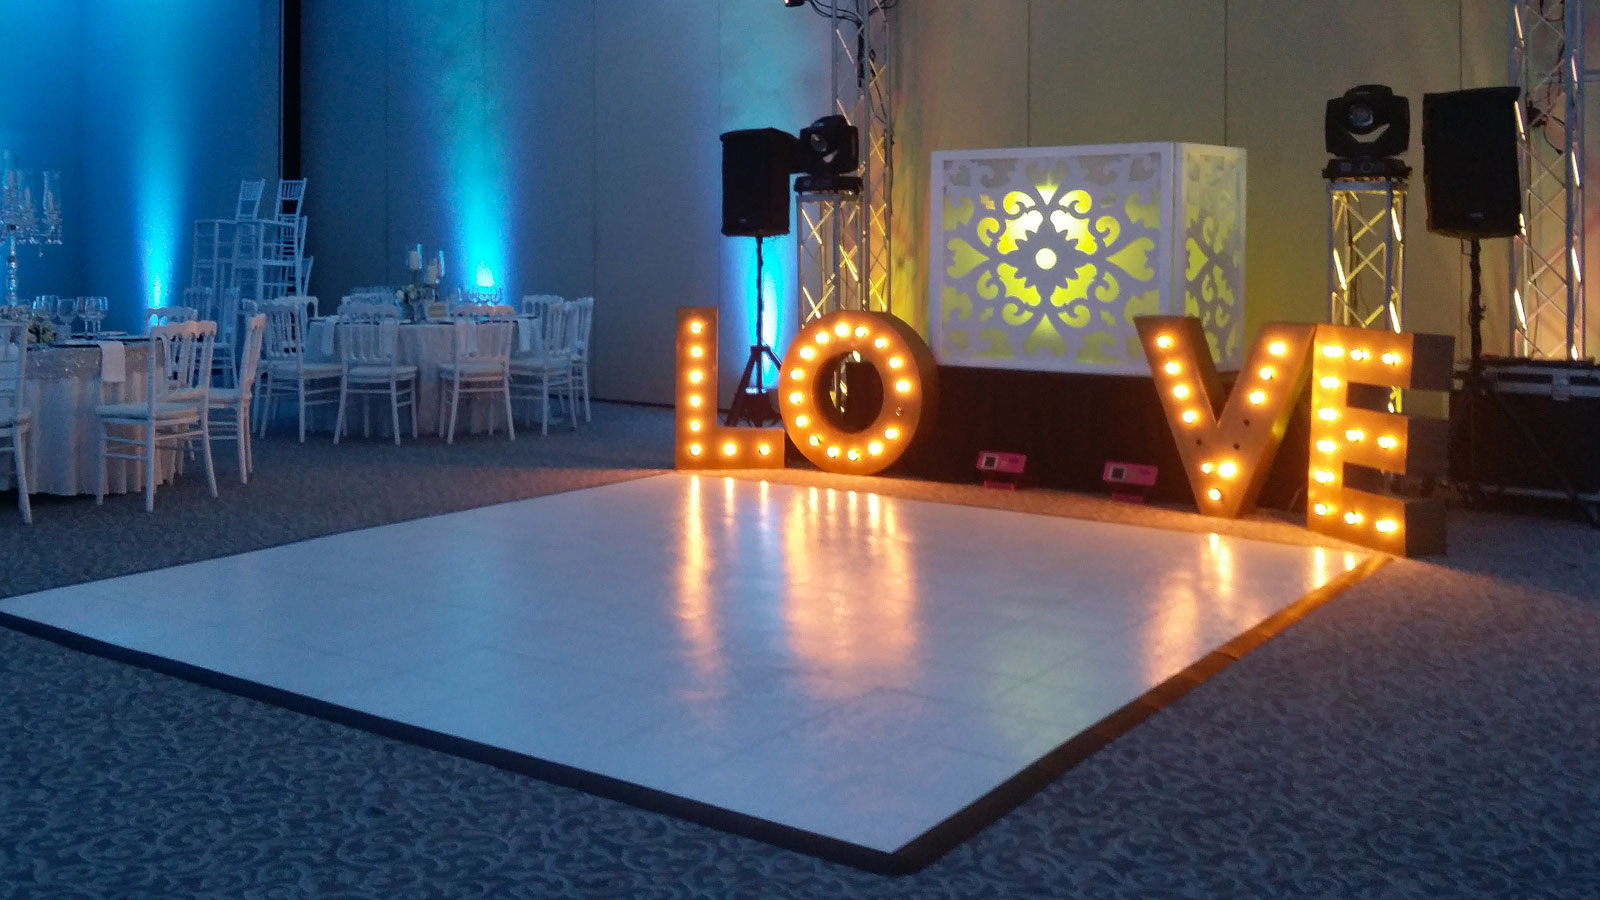 12 By 12 slate white dance floor with edging, Love sign with lights in event space